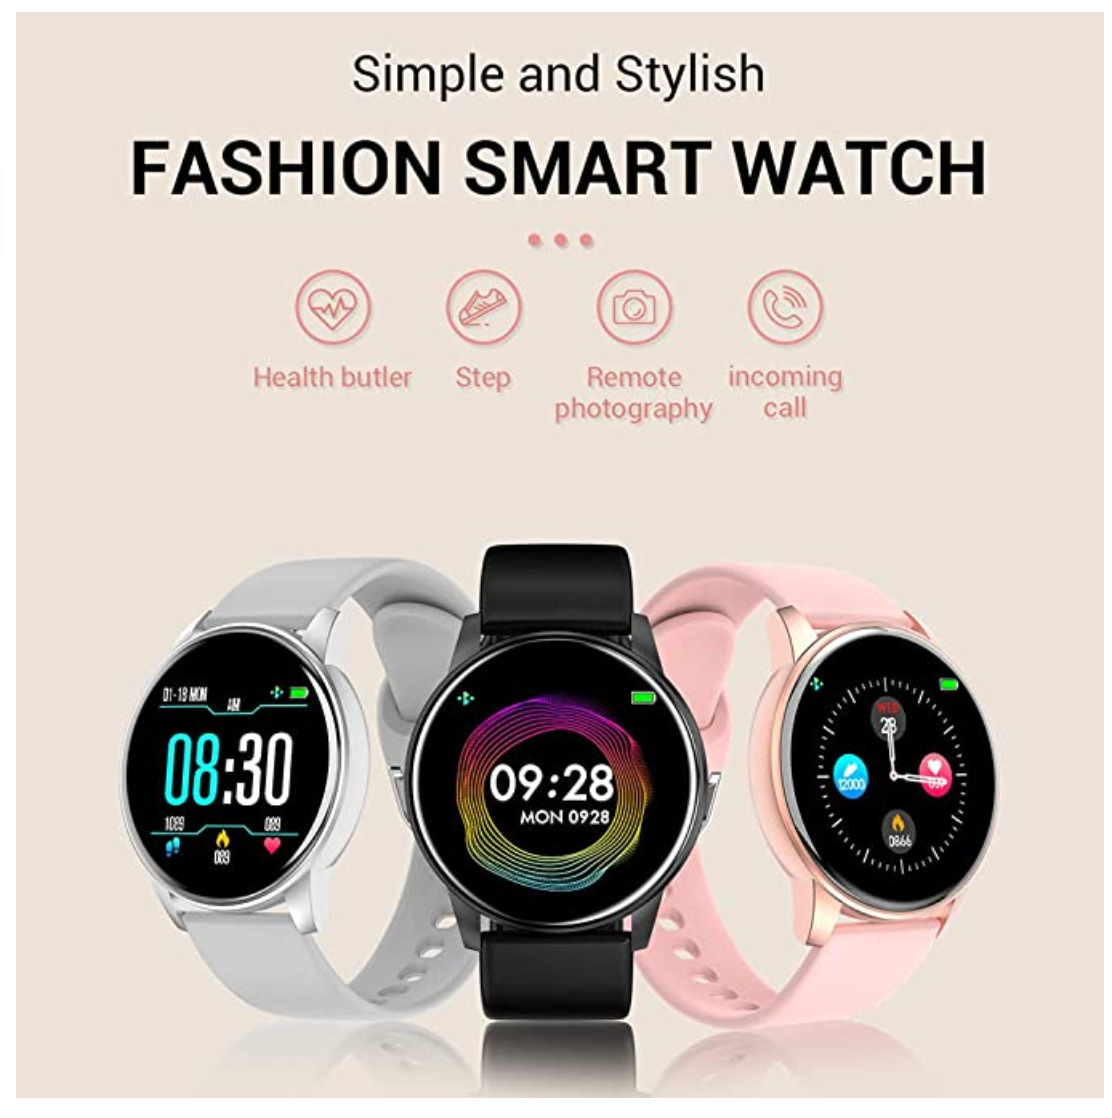 Smart Watch CPU HS6620D for Android 4.4 and IOS 8.2 | Black & Pink ...